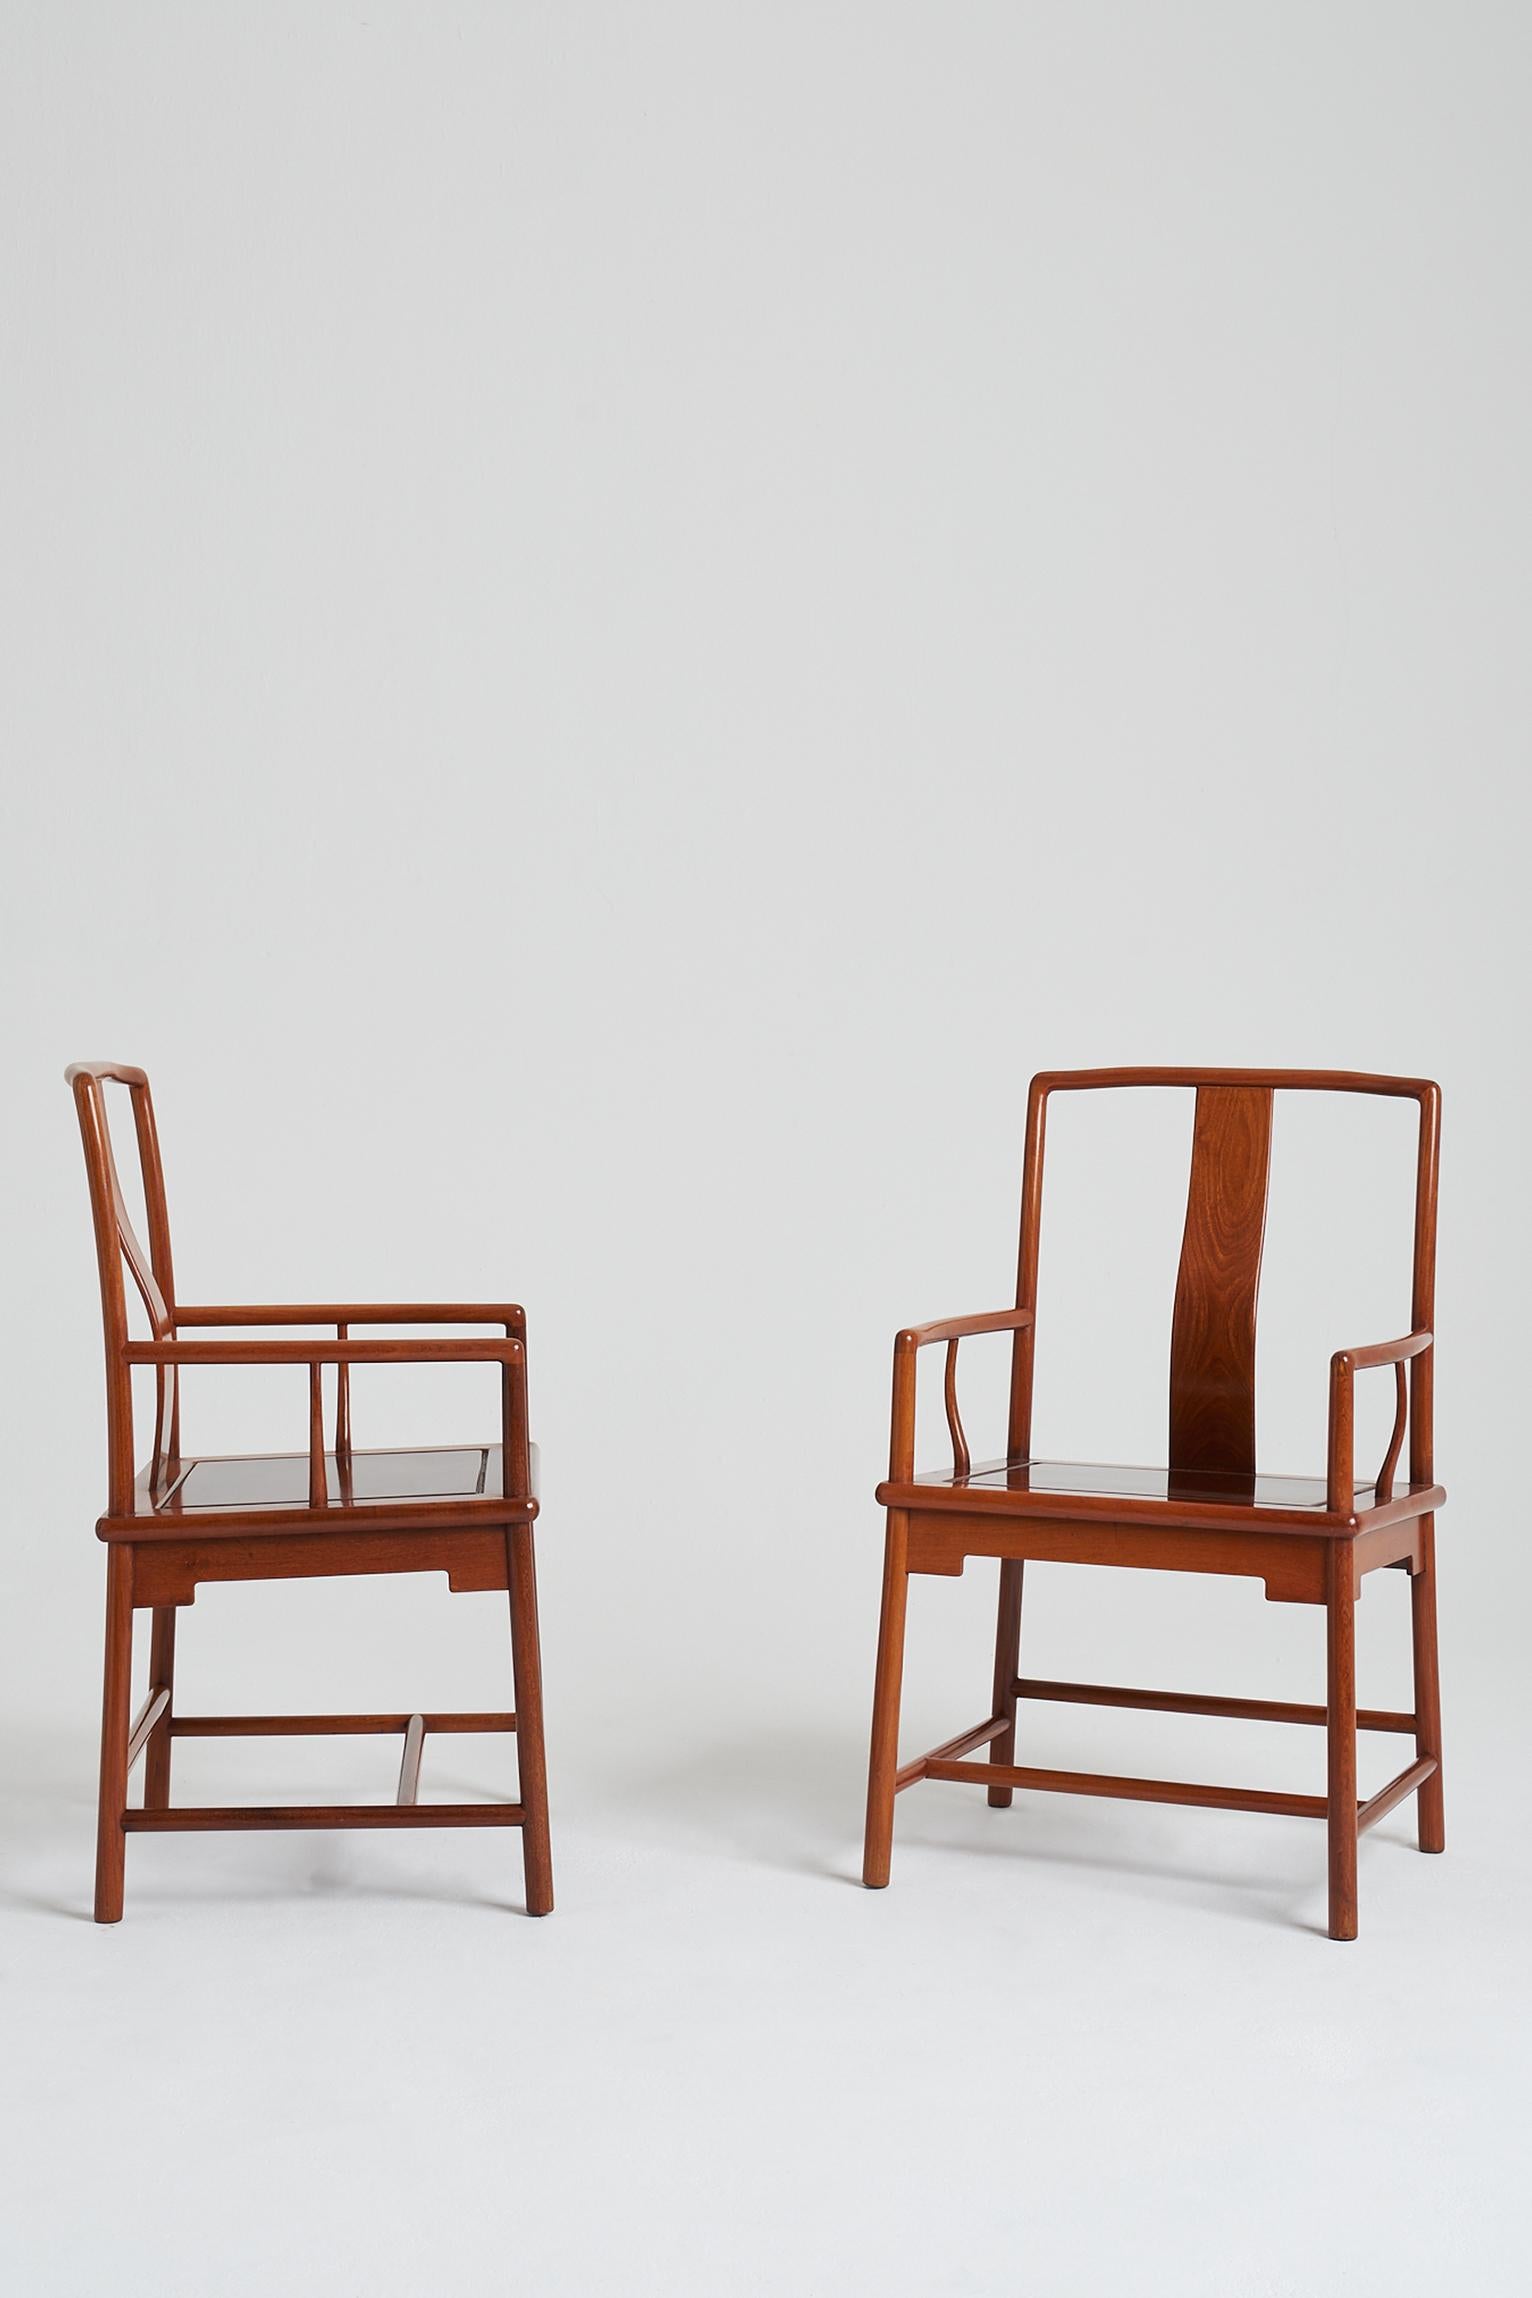 Chinese Pair of Yokeback Armchairs in the Ming Style